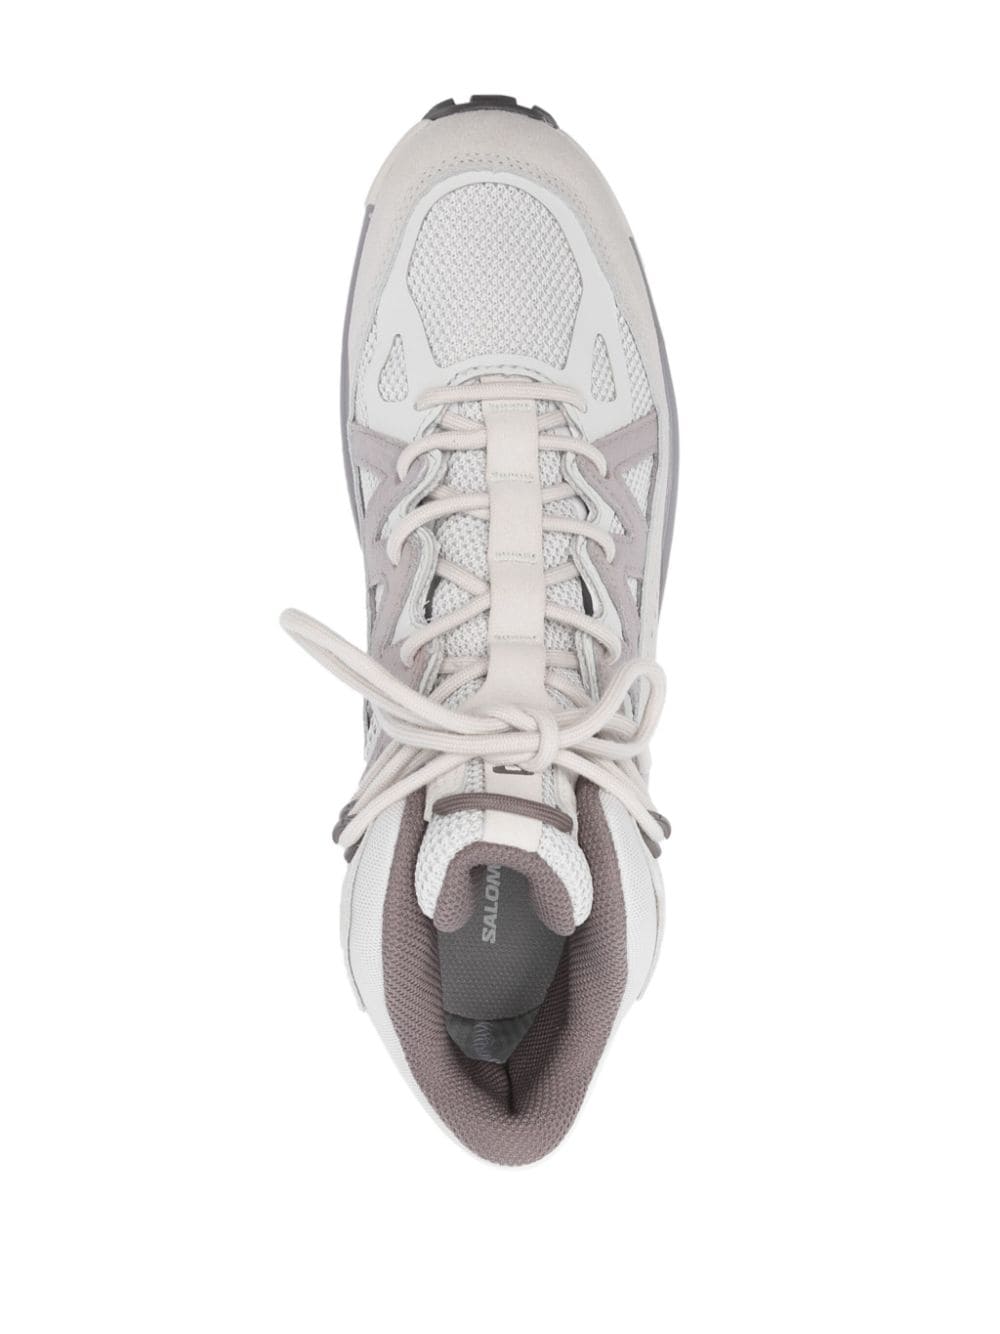 Advanced Odyssey Elmt Mid panelled sneakers<BR/><BR/>